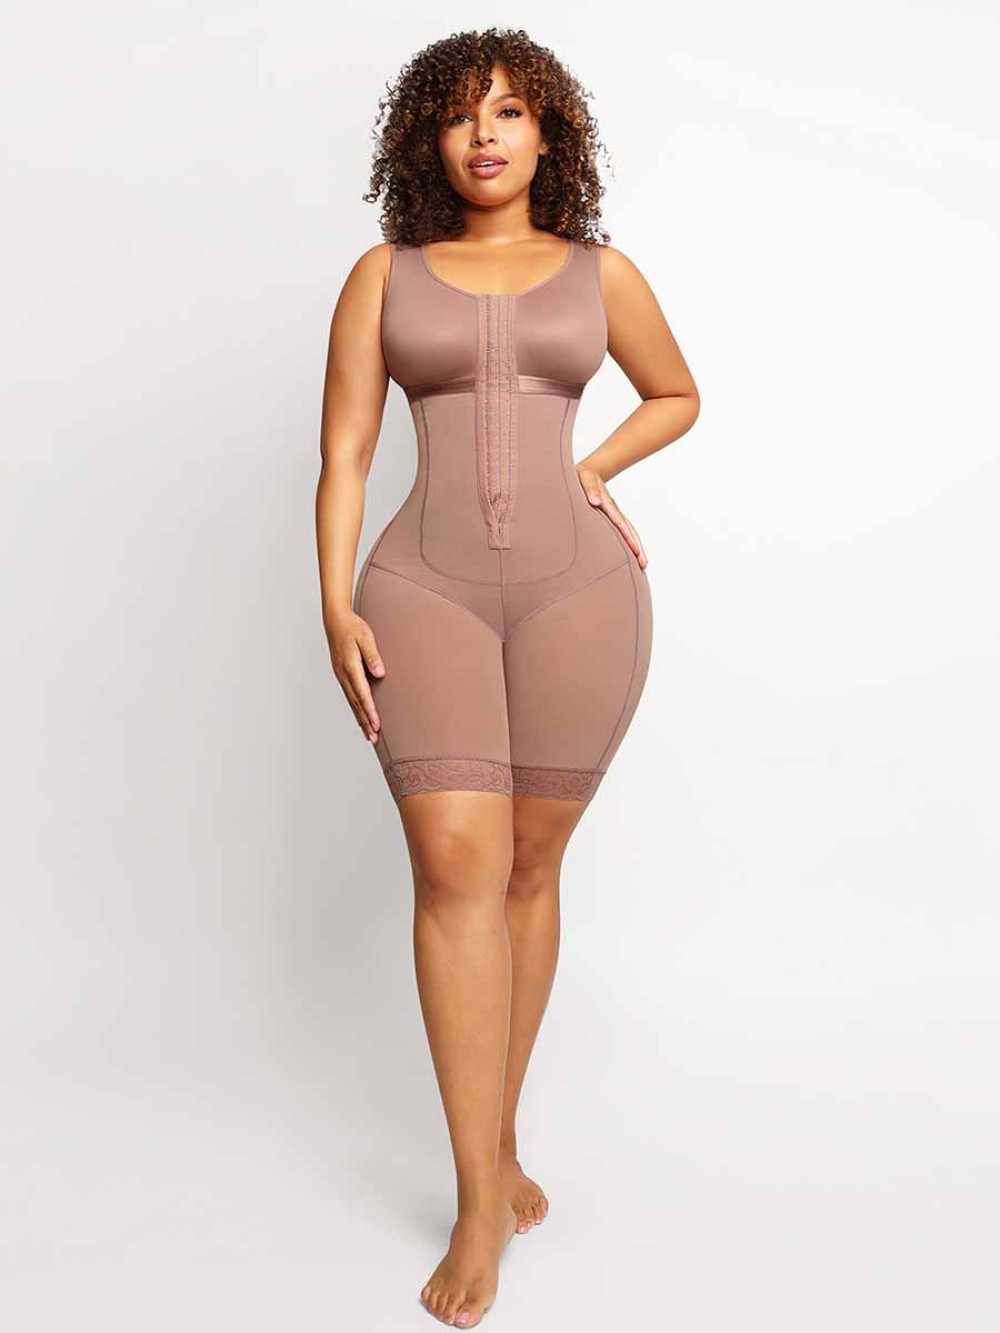 High Quality Full Compression Fajas Colombians Body Shaper